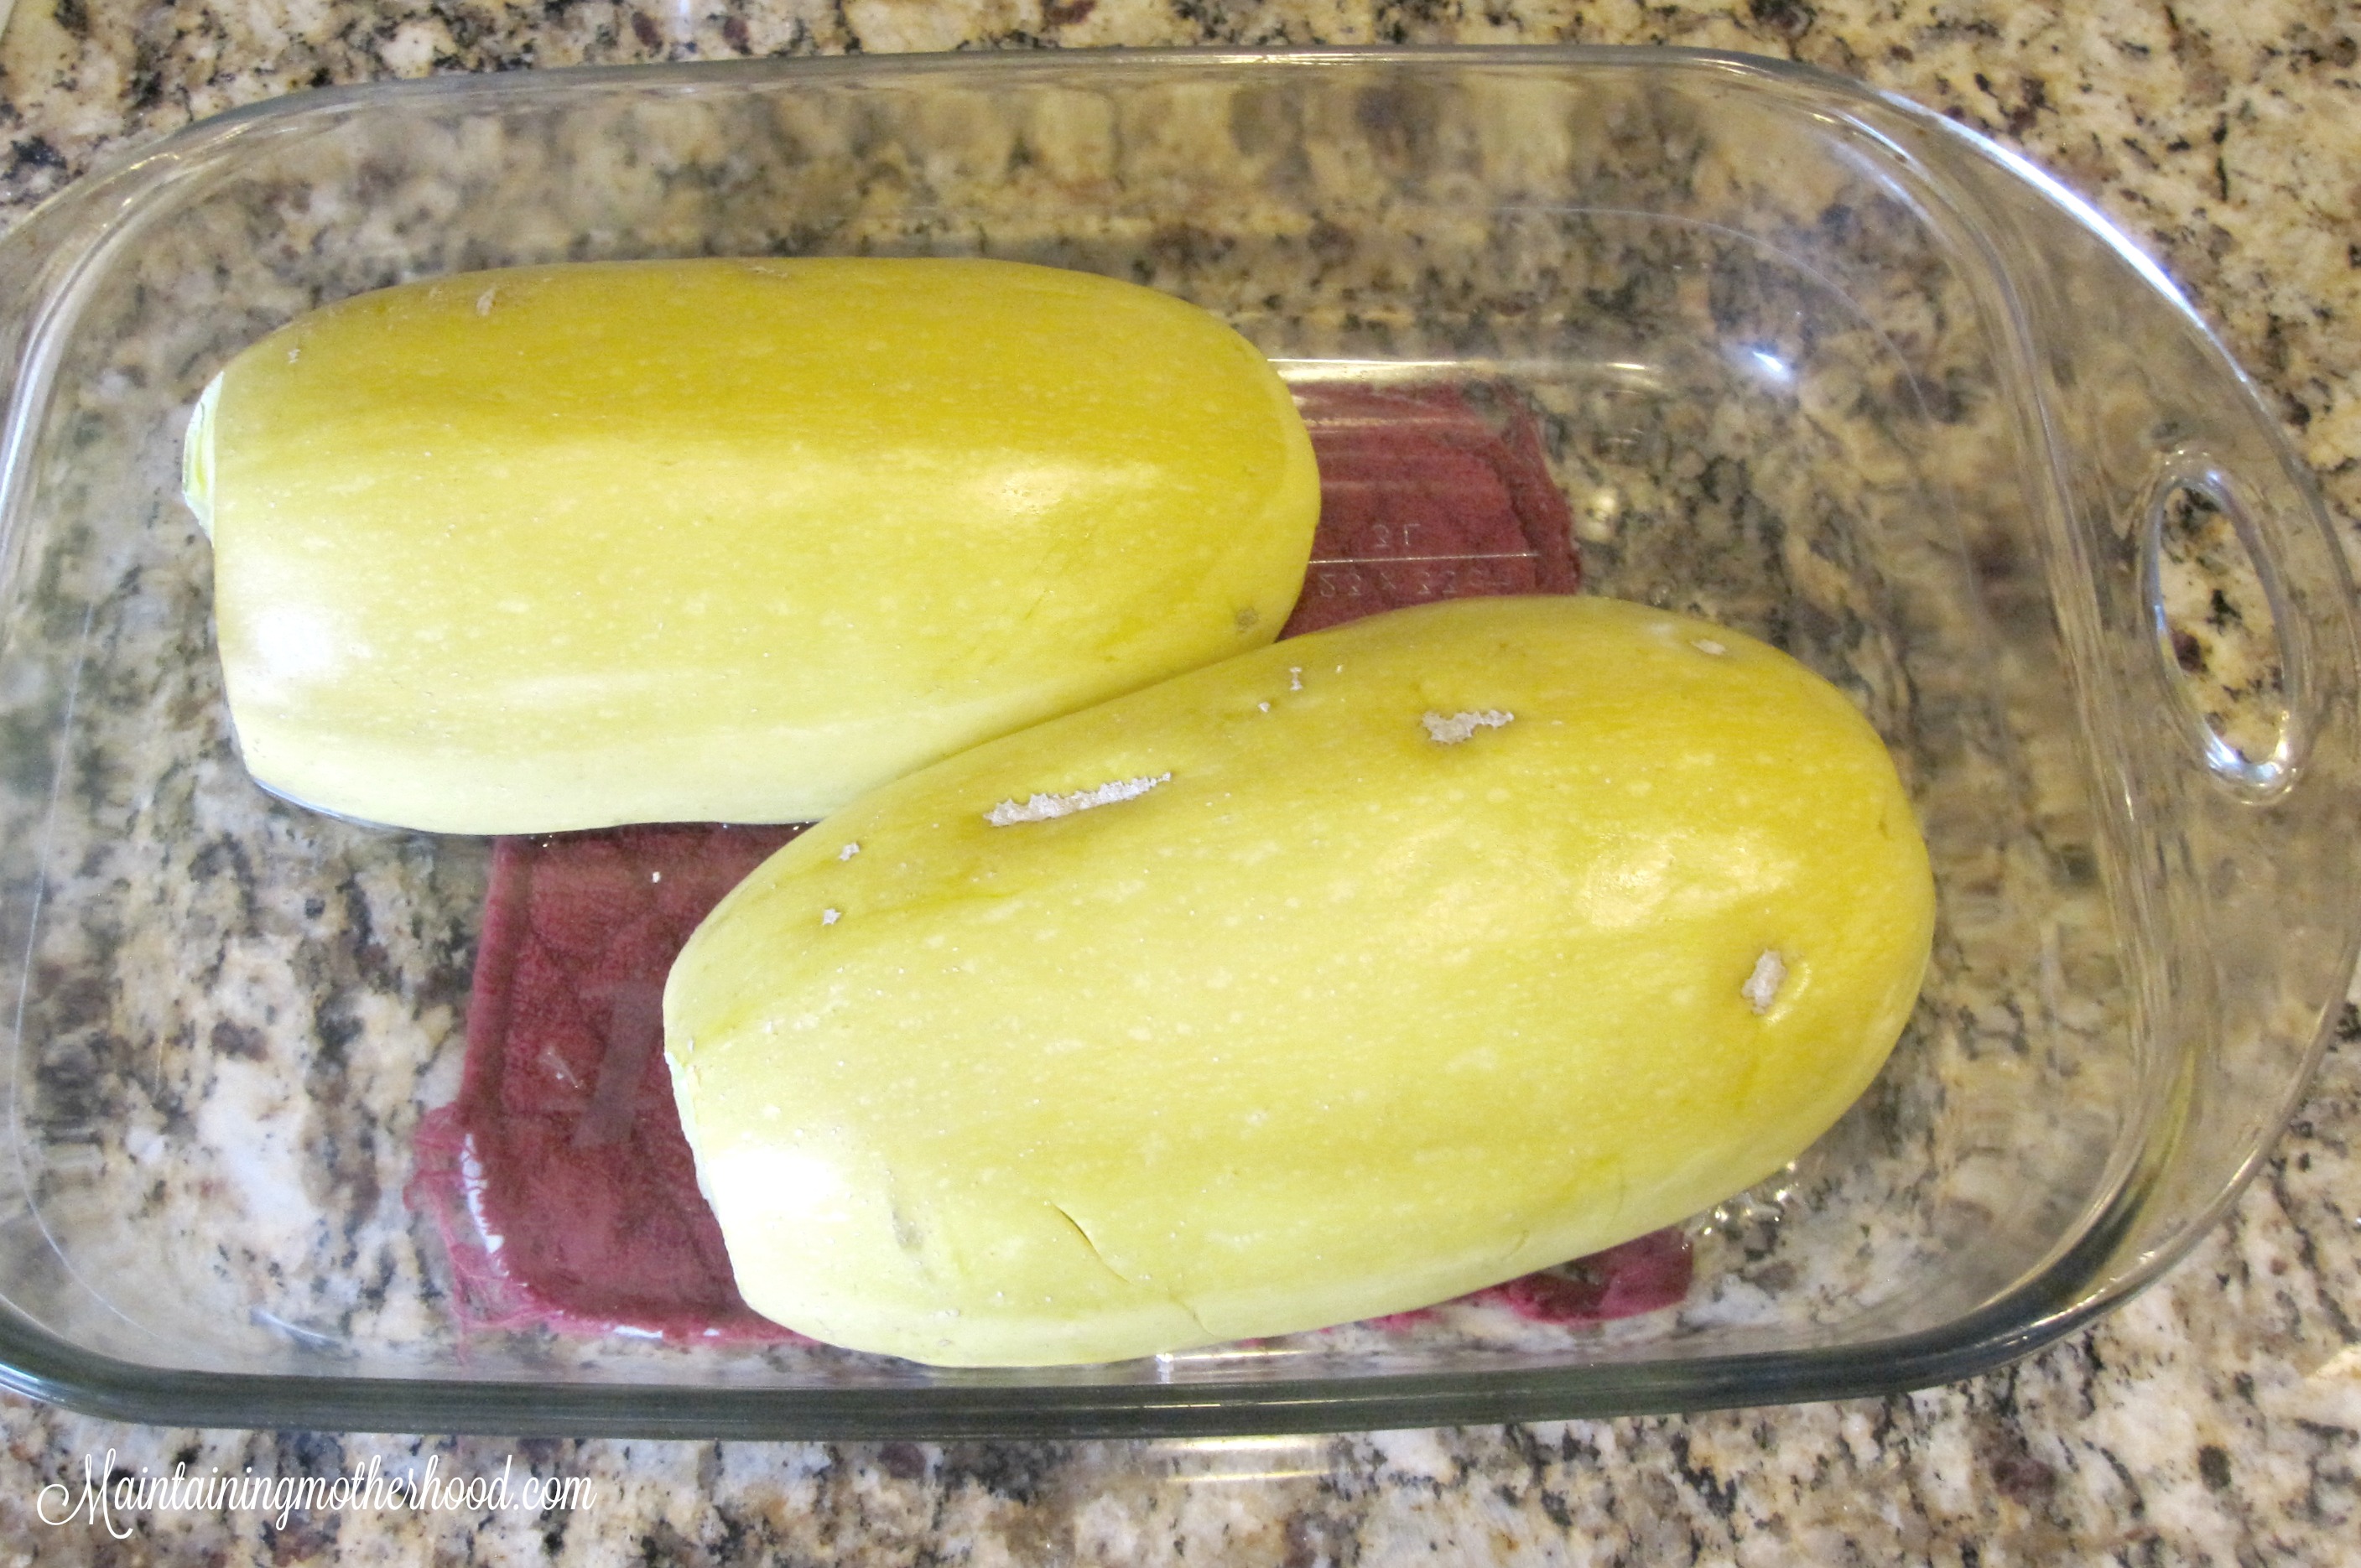 Spaghetti squash stores well, is simple to cook, and has a mild flavor so my kids will eat it. It can also easily substitute for spaghetti noodles!